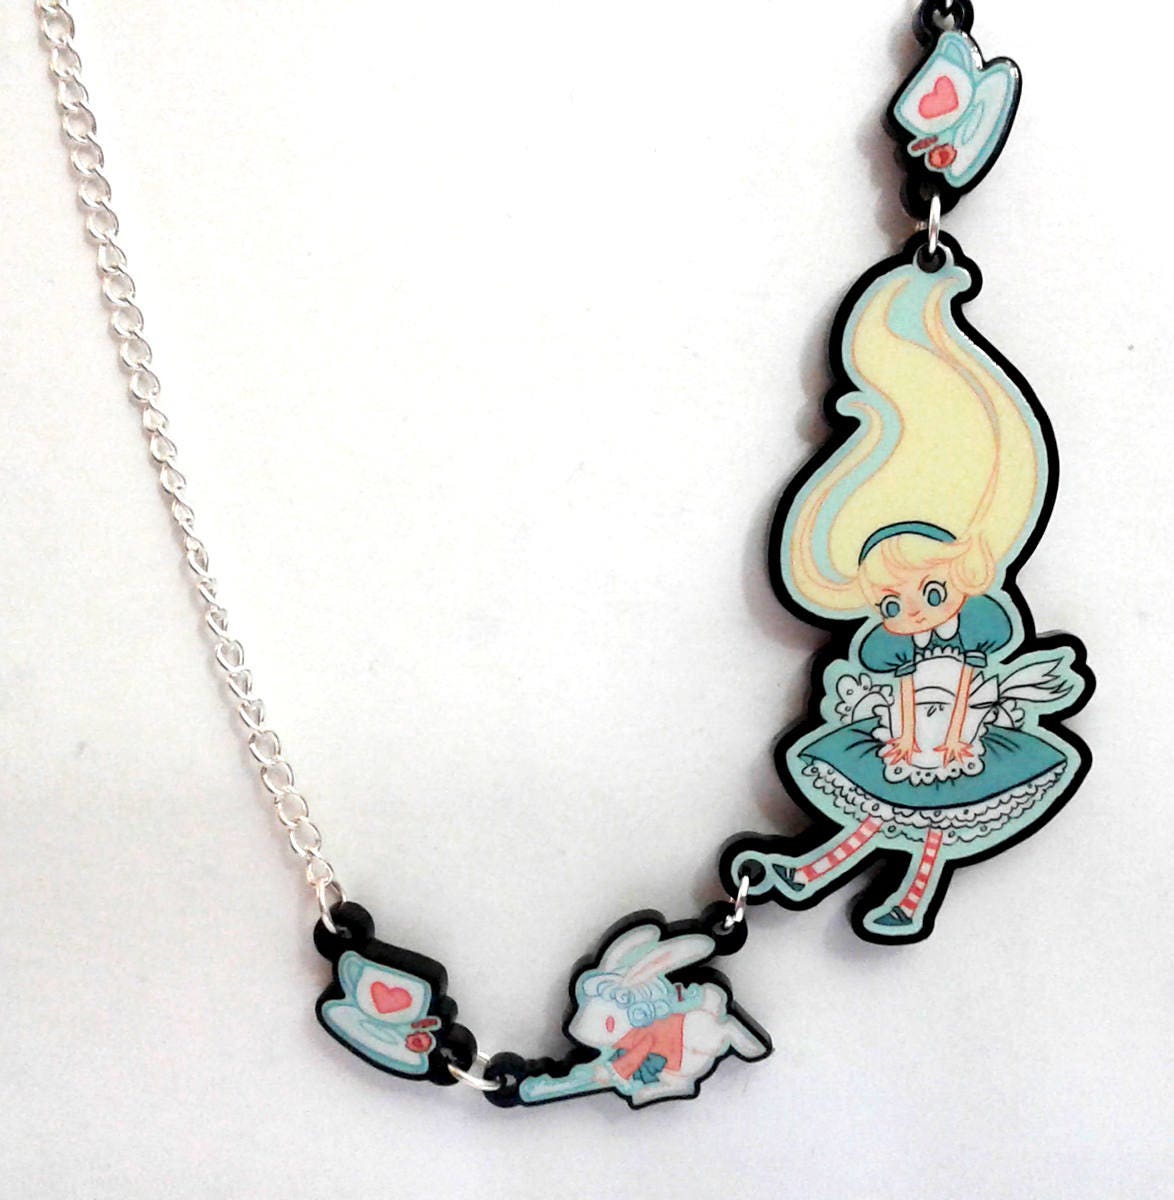 Alice Down the Rabbit-hole Multi-charm Necklace - Etsy